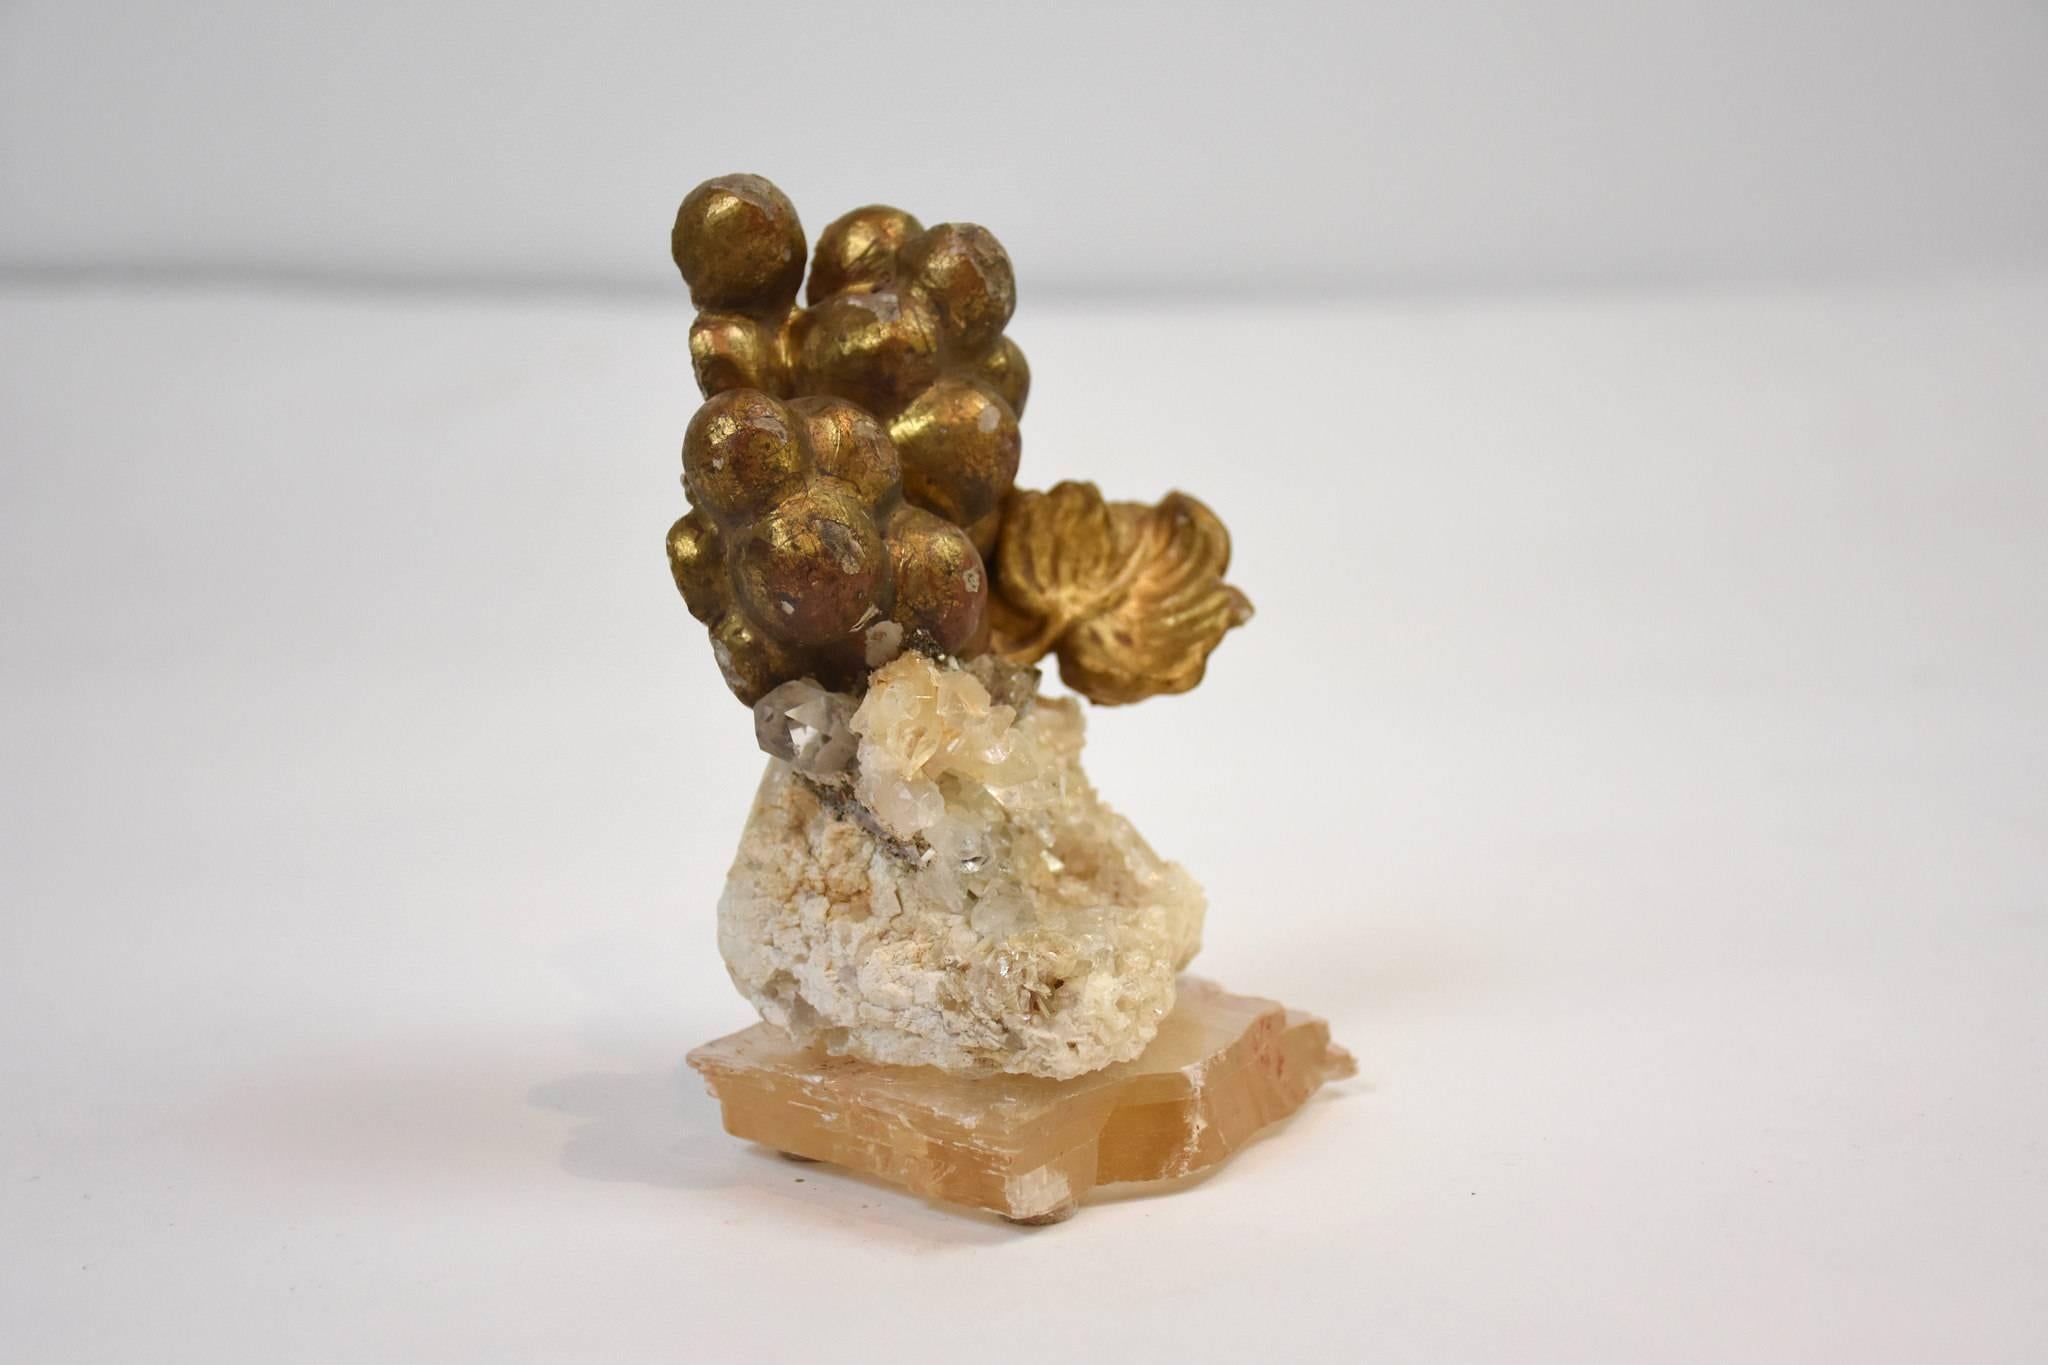 18th century Italian giltwood grape fragment decorated with quartz crystals in matrix and set on a natural forming selenite base. A beautiful antique artifact that has been taken away from it's original context and changed into an organic work of